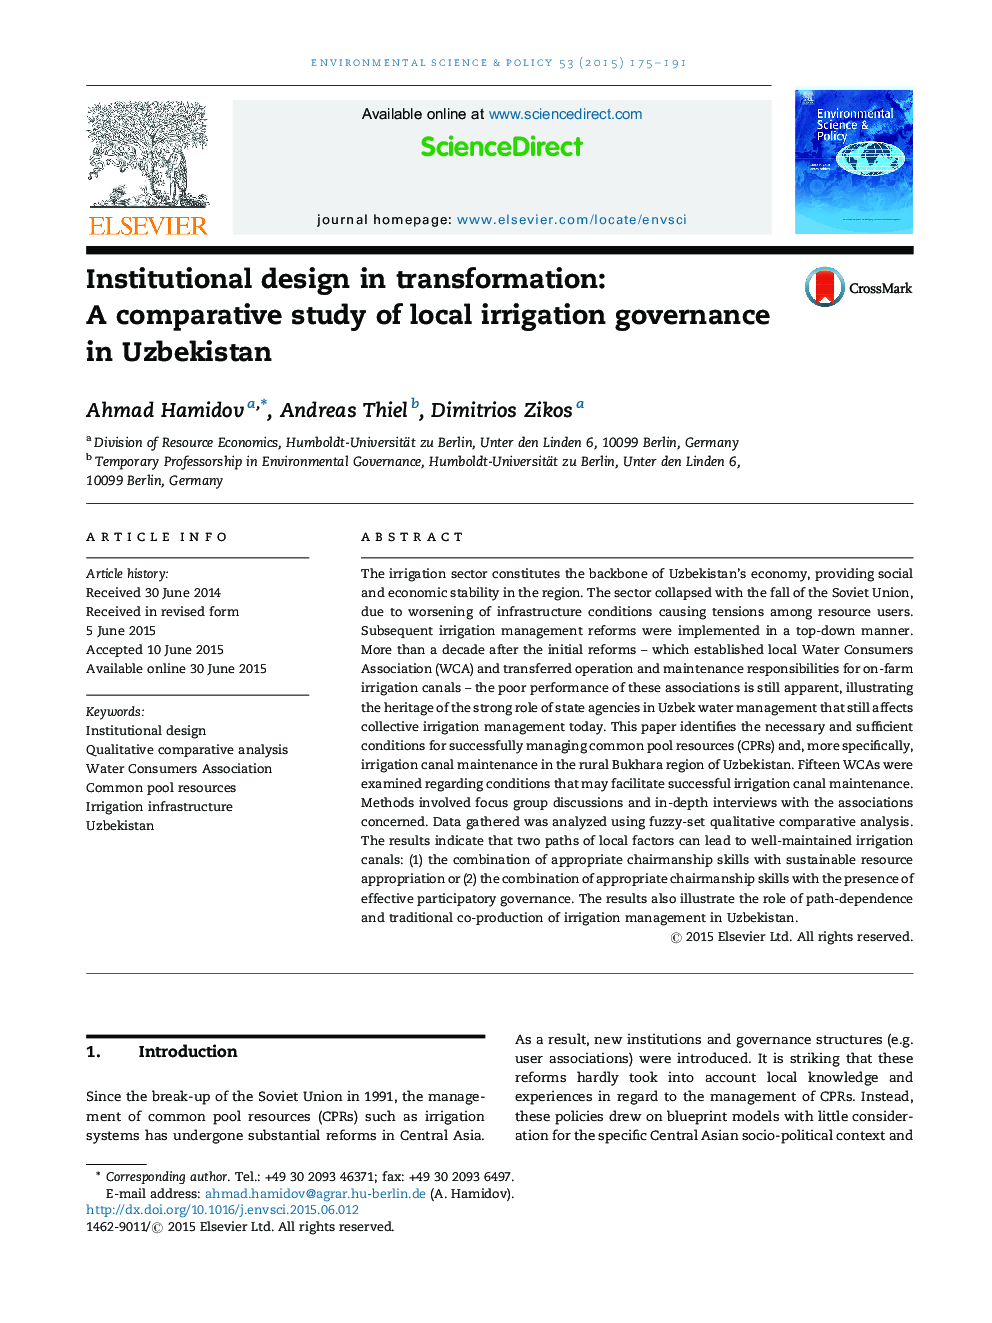 Institutional design in transformation: A comparative study of local irrigation governance in Uzbekistan